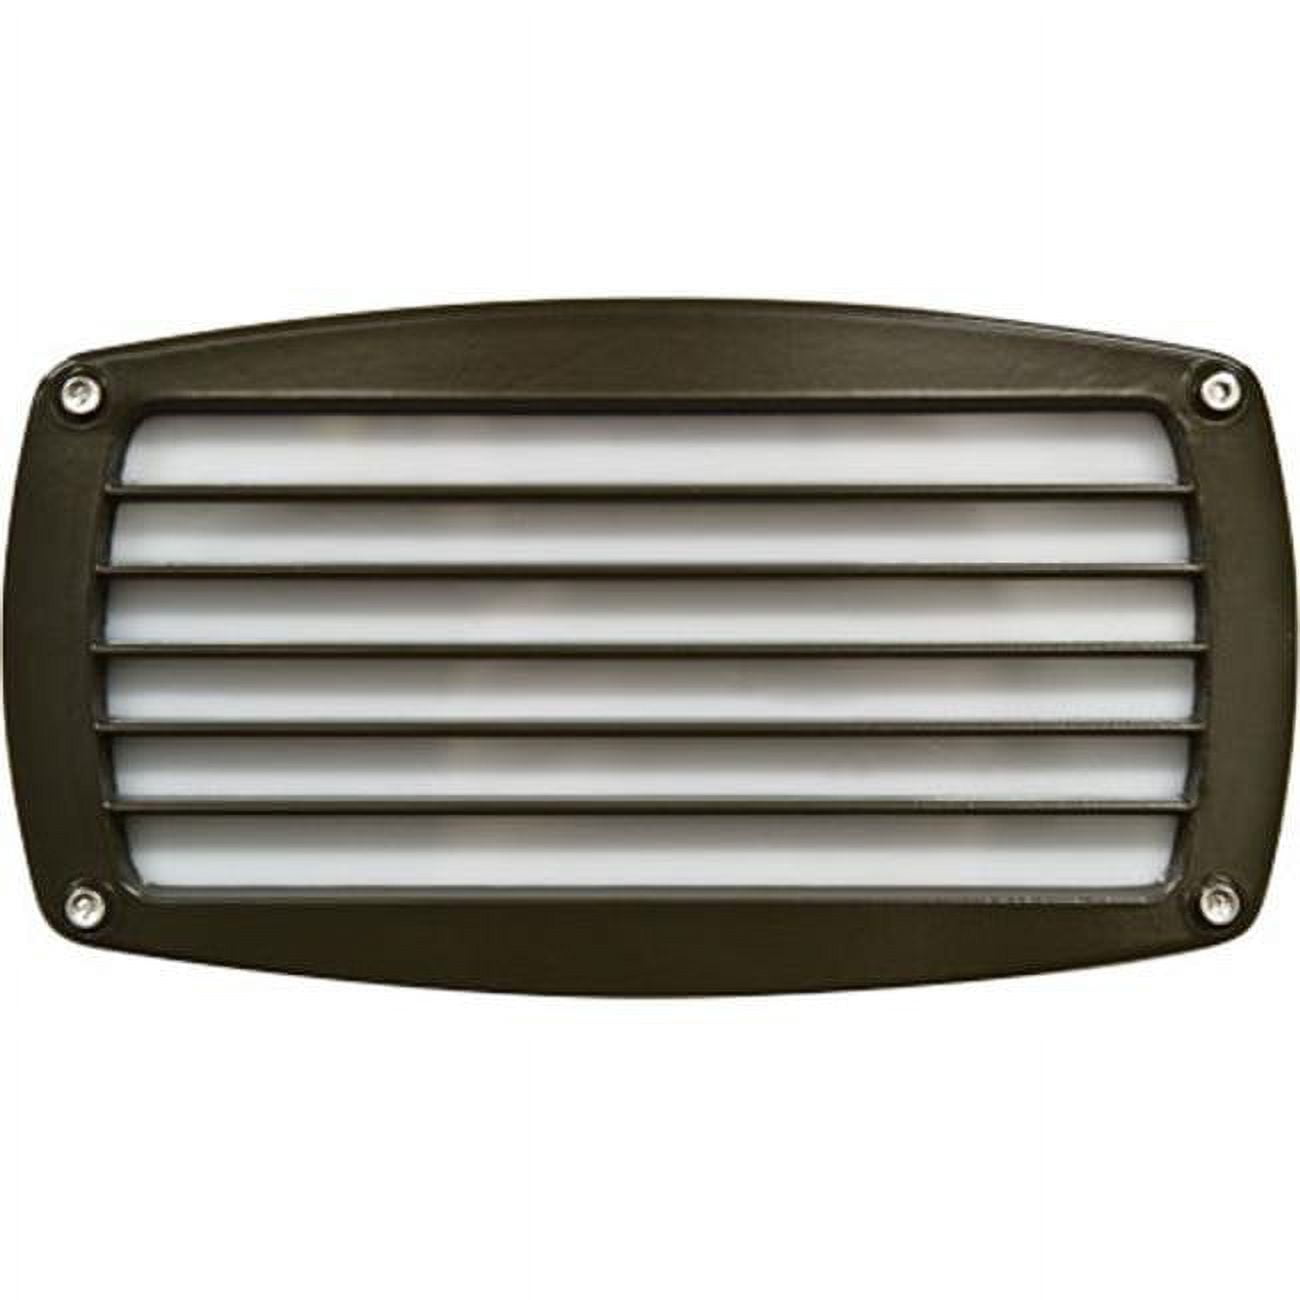 Picture of Dabmar Lighting DSL1015-BZ Recessed Louvered Brick, Step & Wall Light, Bronze - 5 x 9 x 3.75 in.